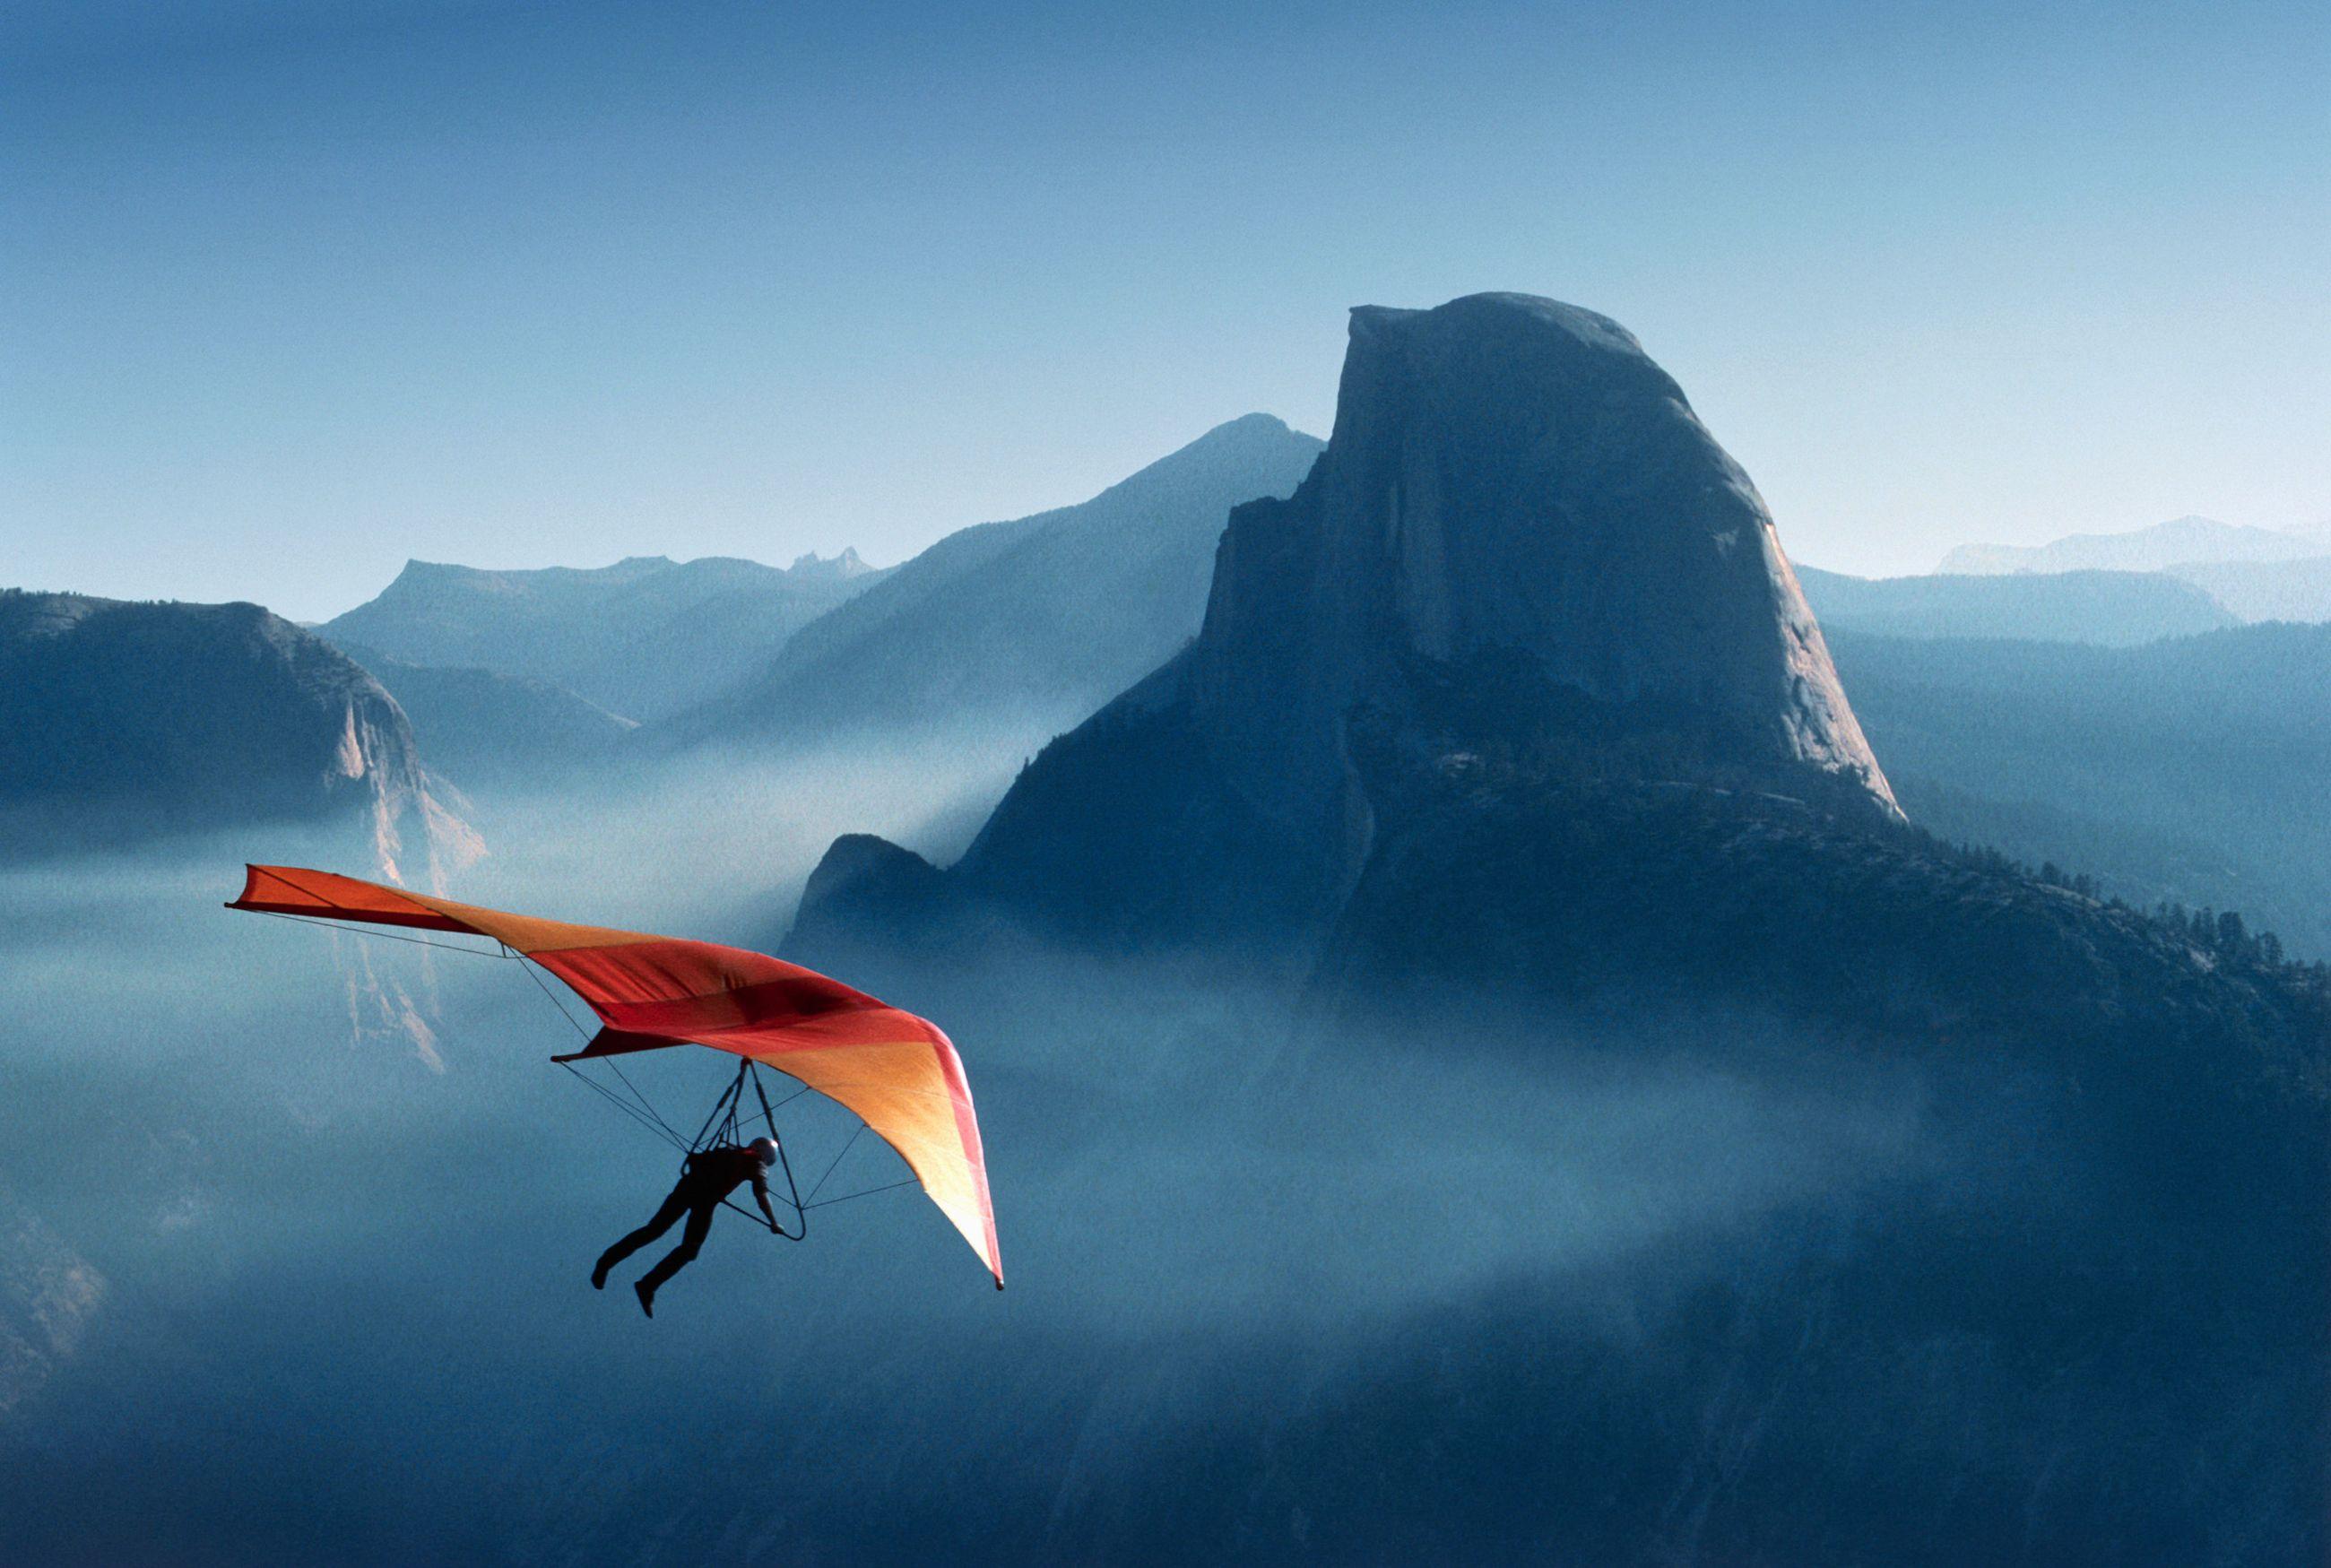 Hang Glider Wallpapers Top Free Hang Glider Backgrounds Wallpaperaccess 